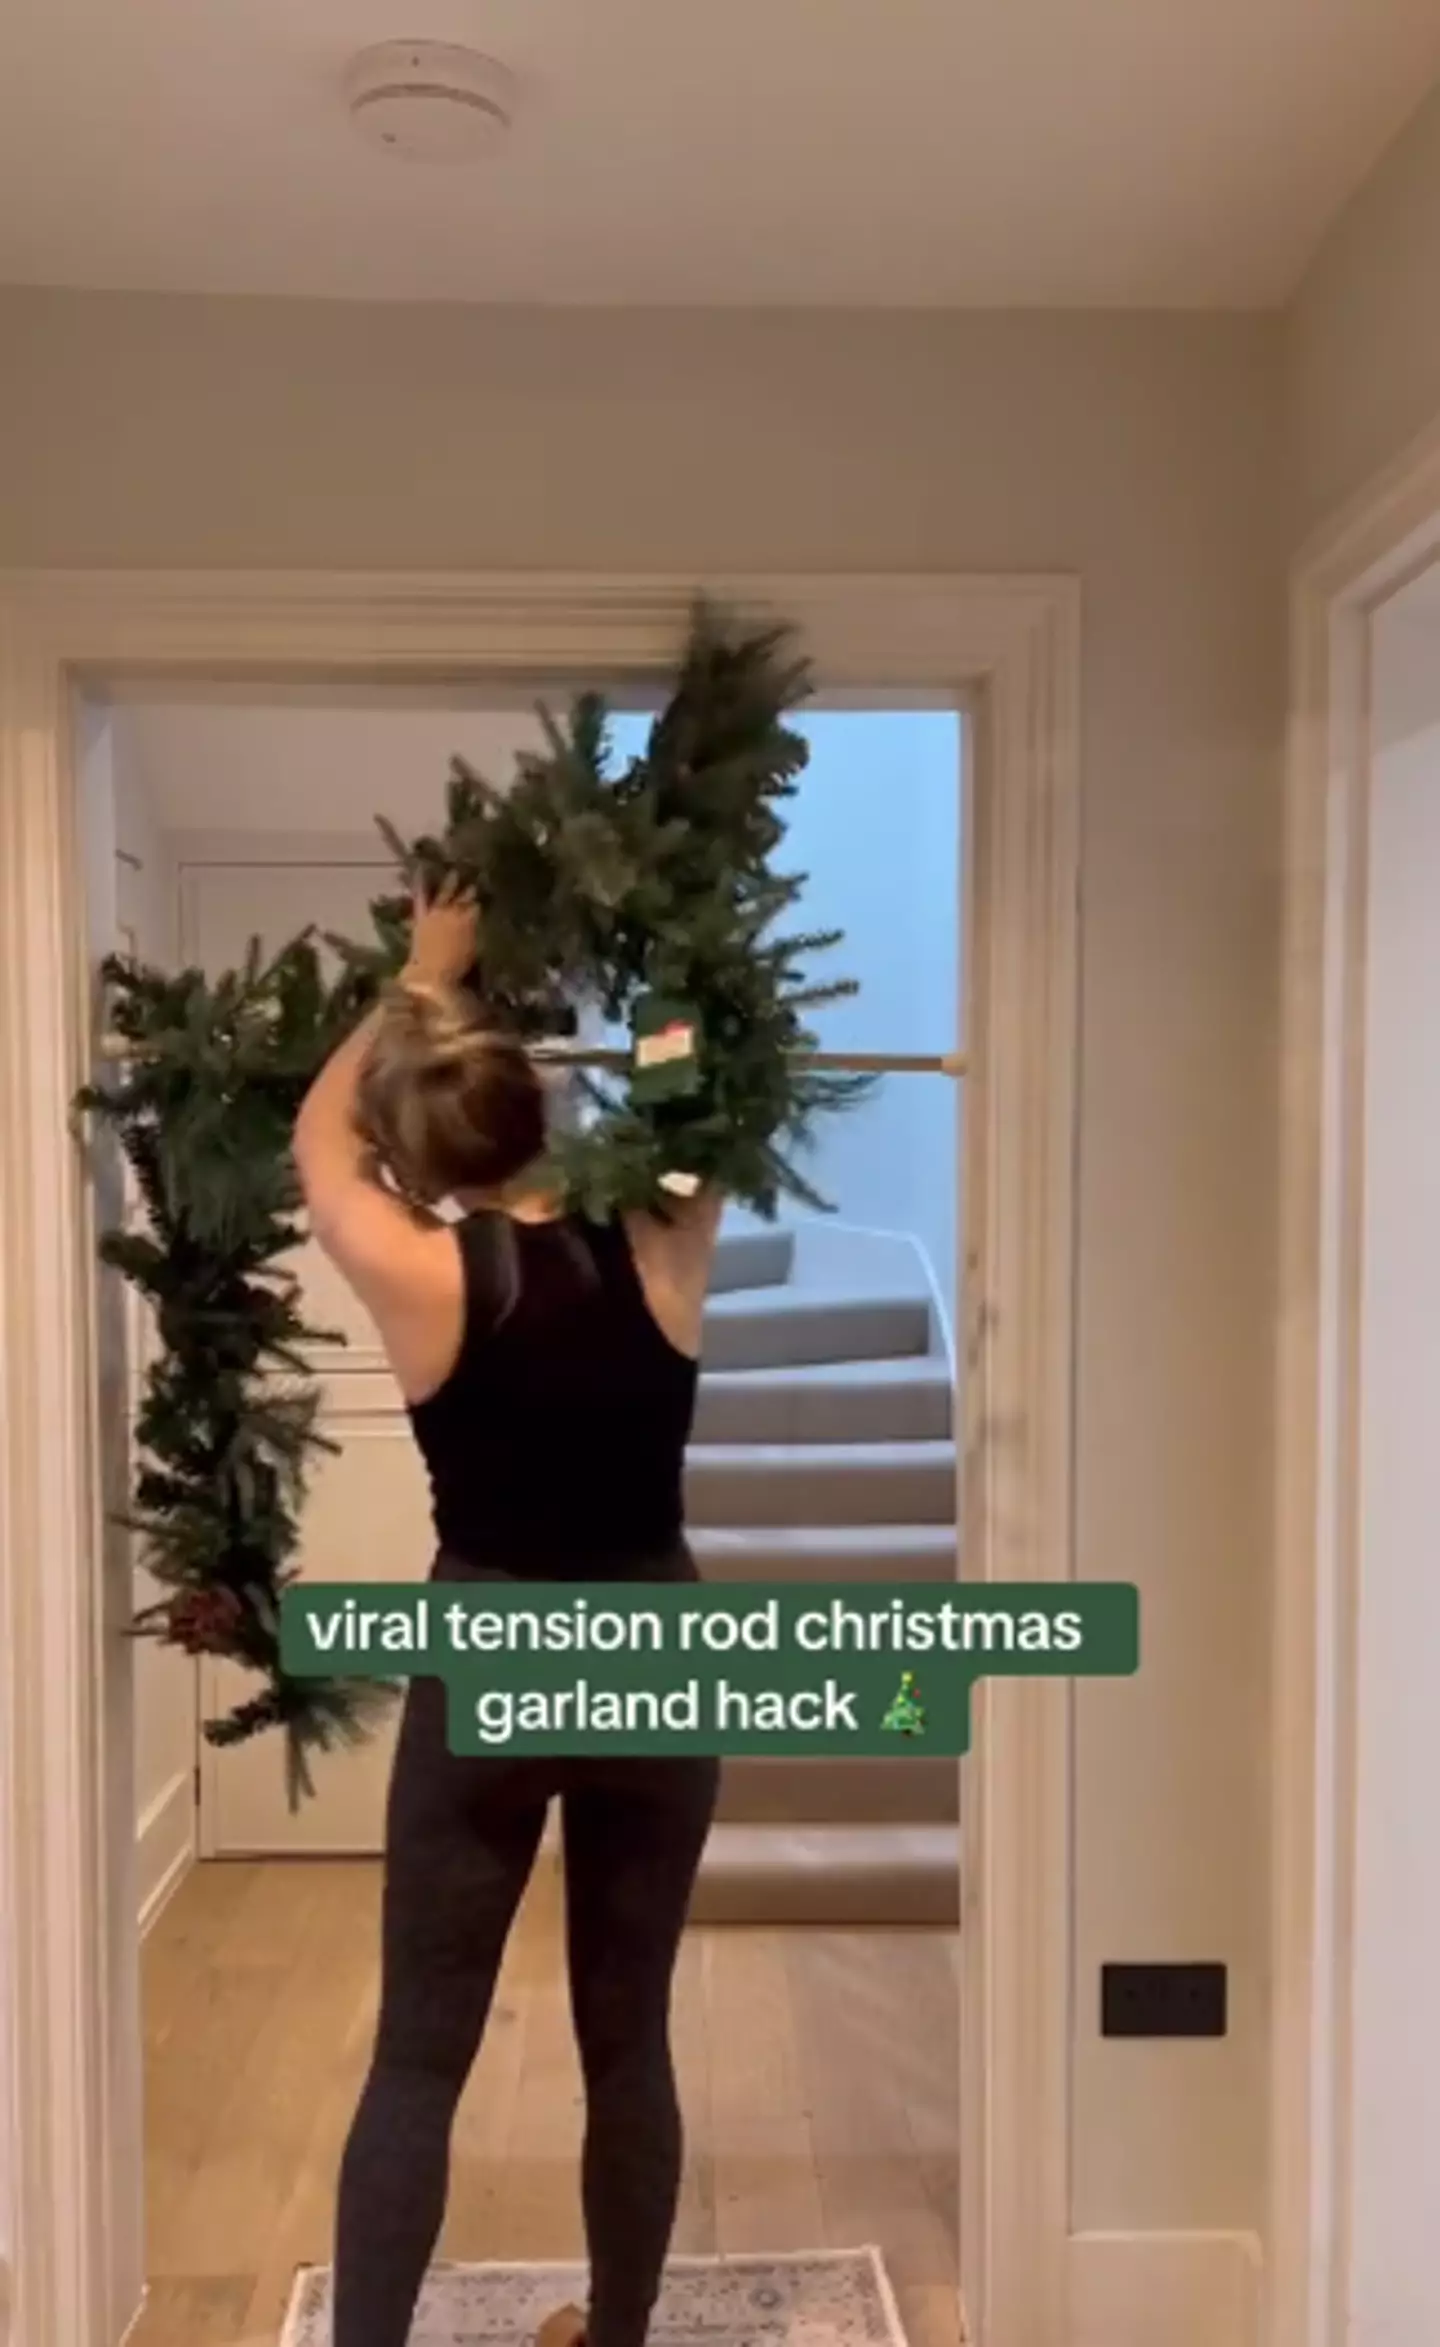 The hack creates expensive looking Christmas garlands.